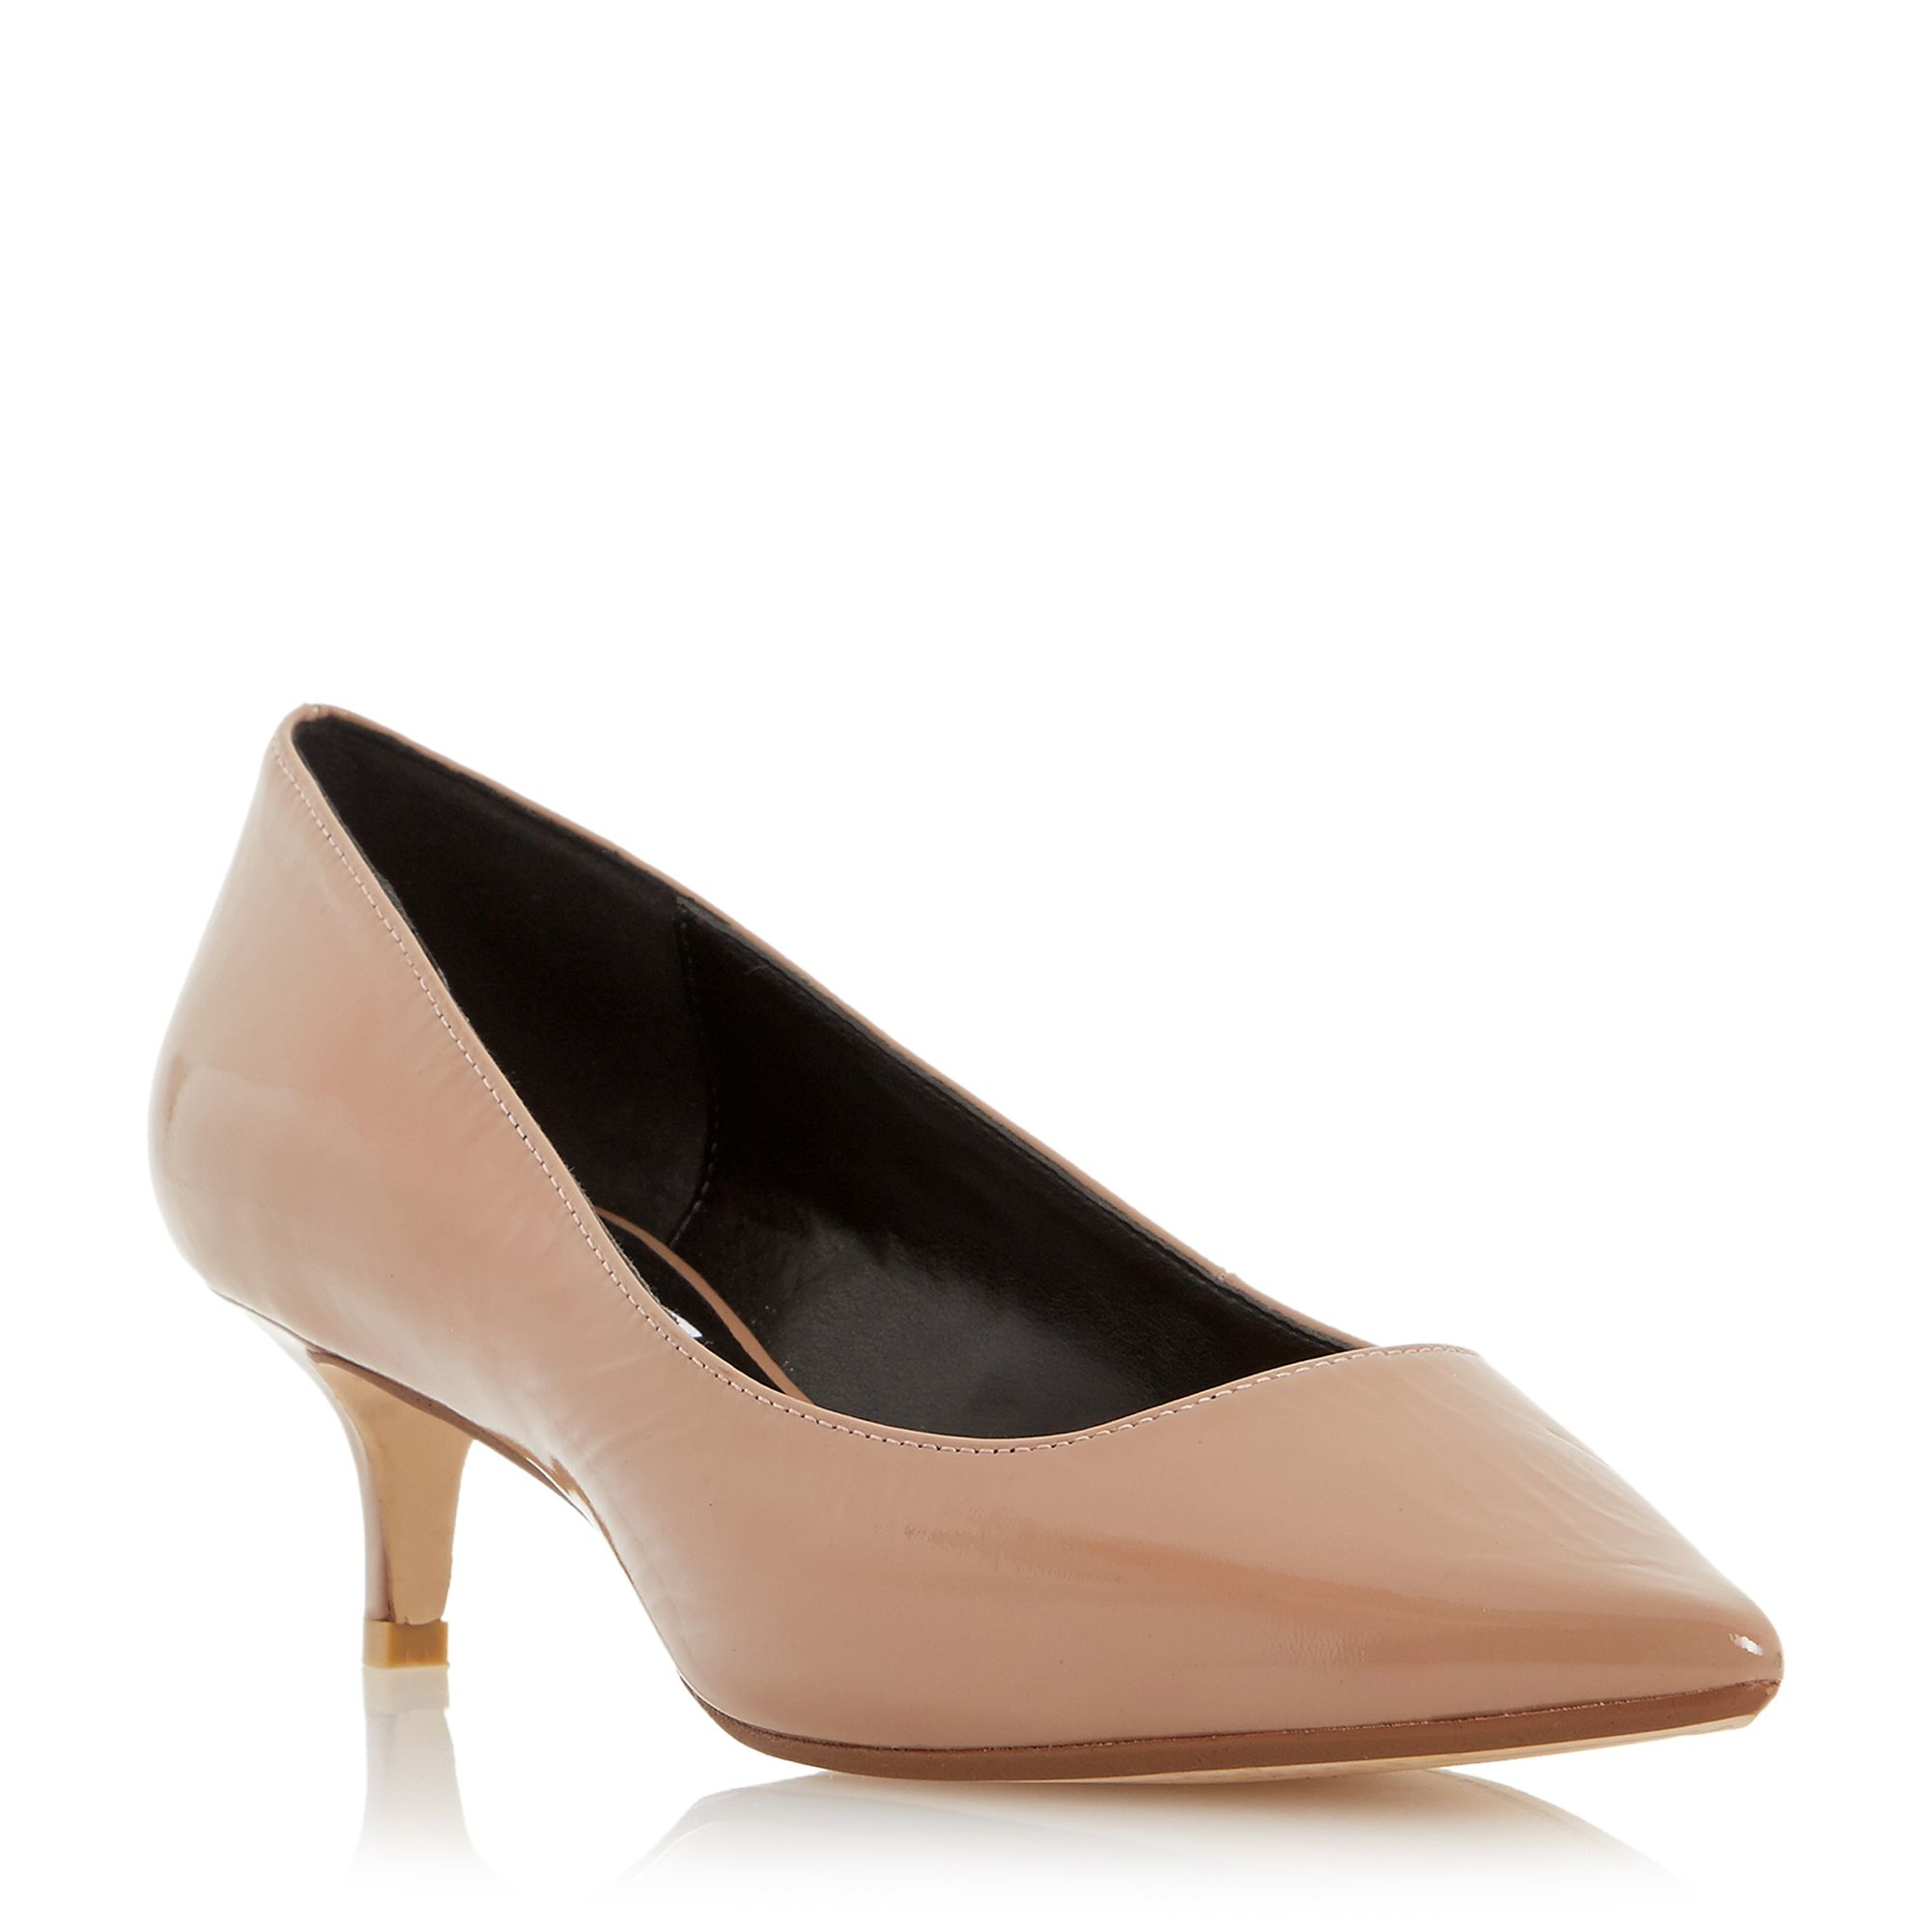 Dune Annielou Pointed Kitten Heel Court Shoes in Brown | Lyst